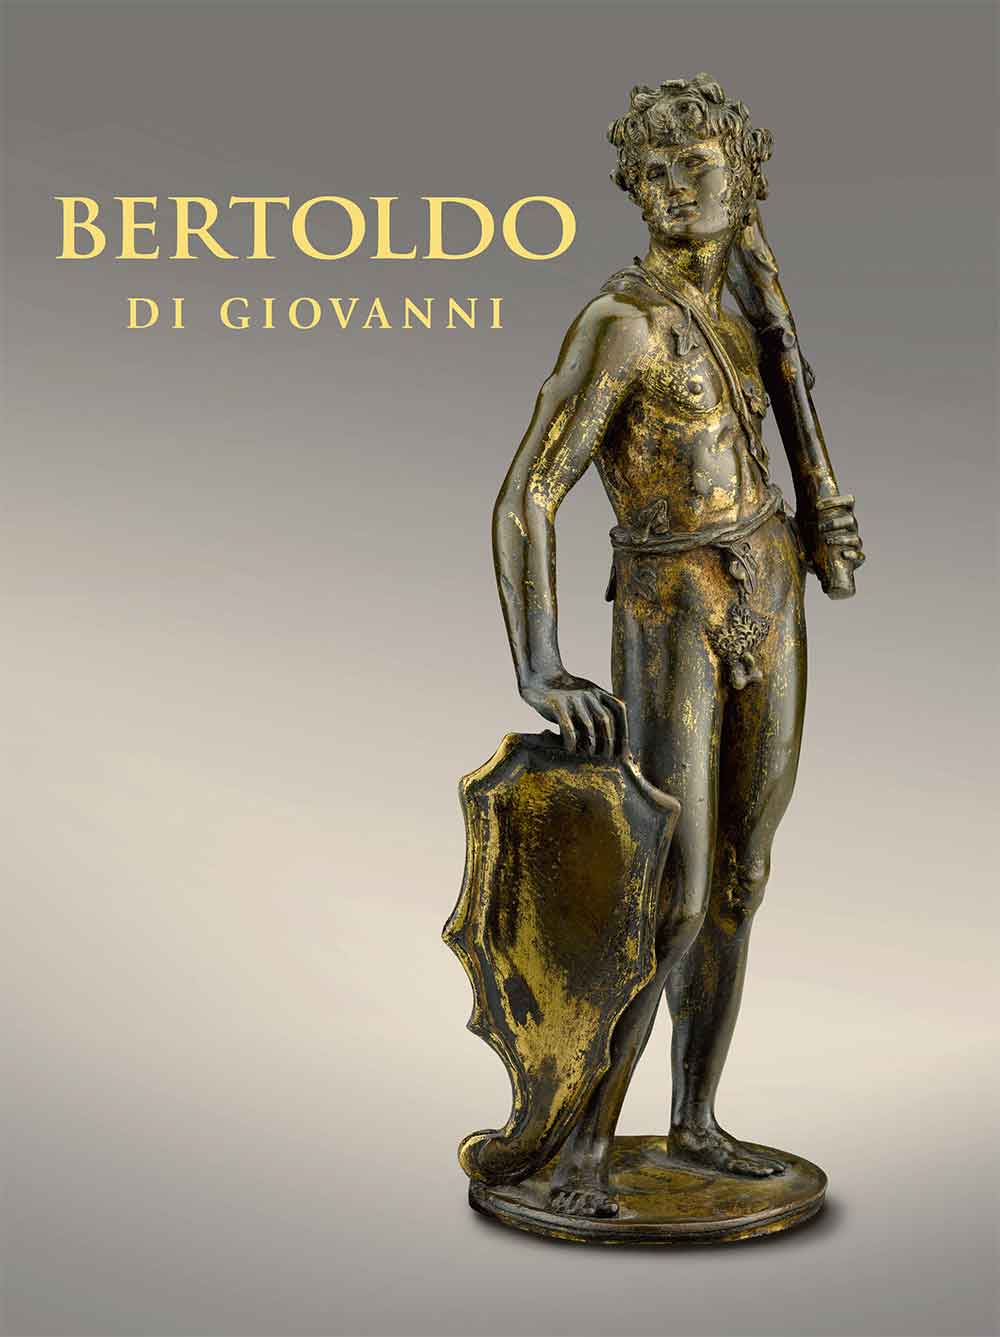 cover of book displaying statuette of man holding club and shield